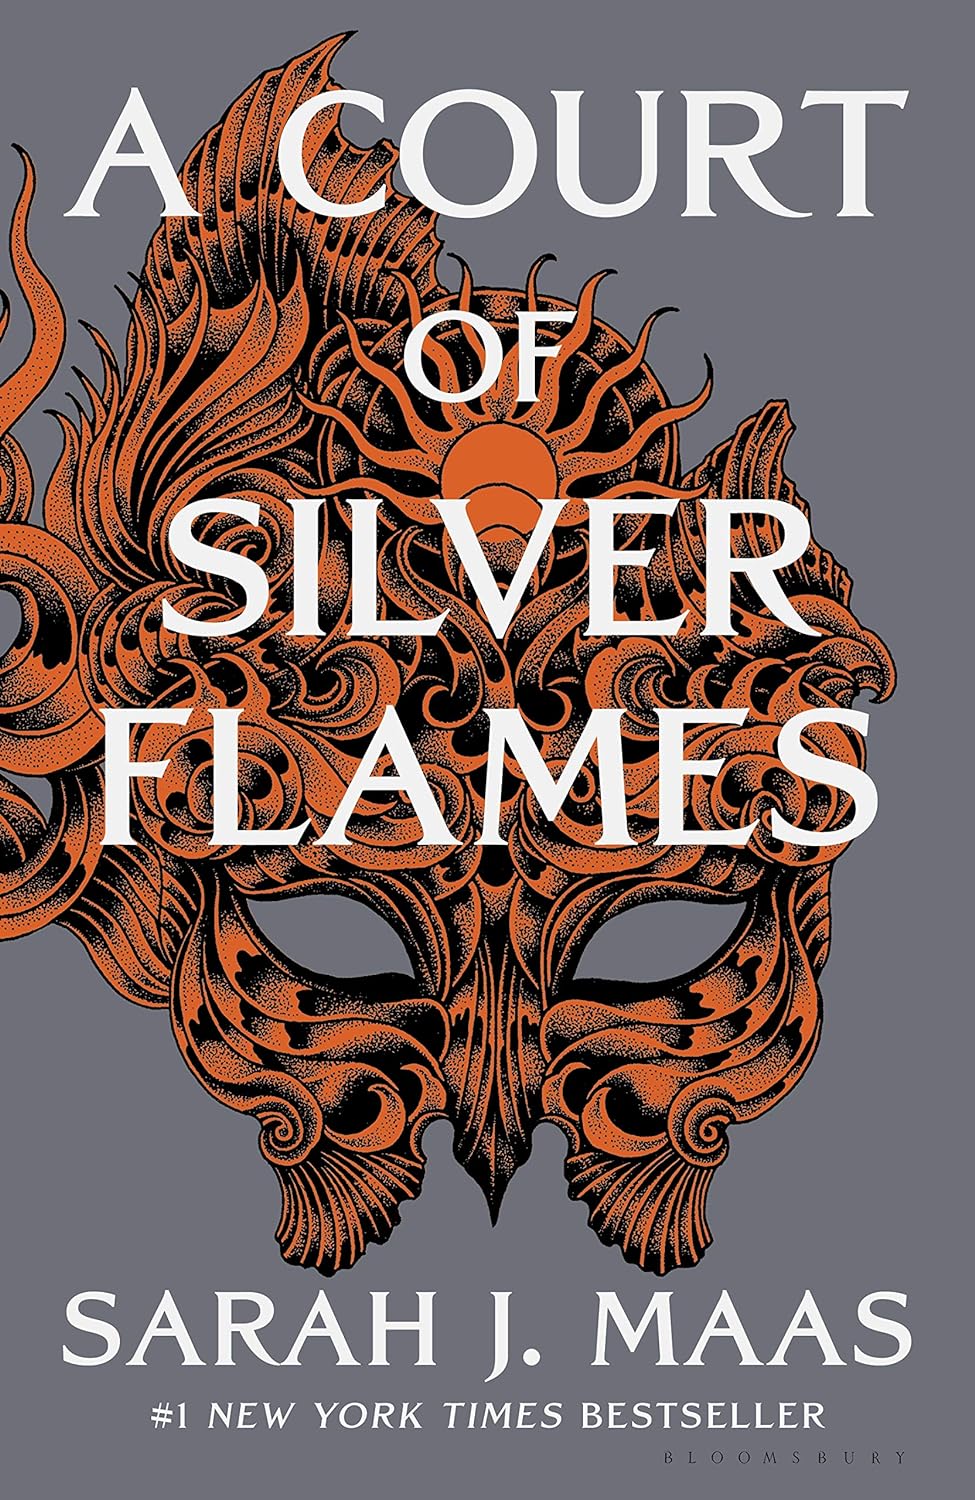 A Court of Silver Flames (A Court of Thorns and Roses Book 5)